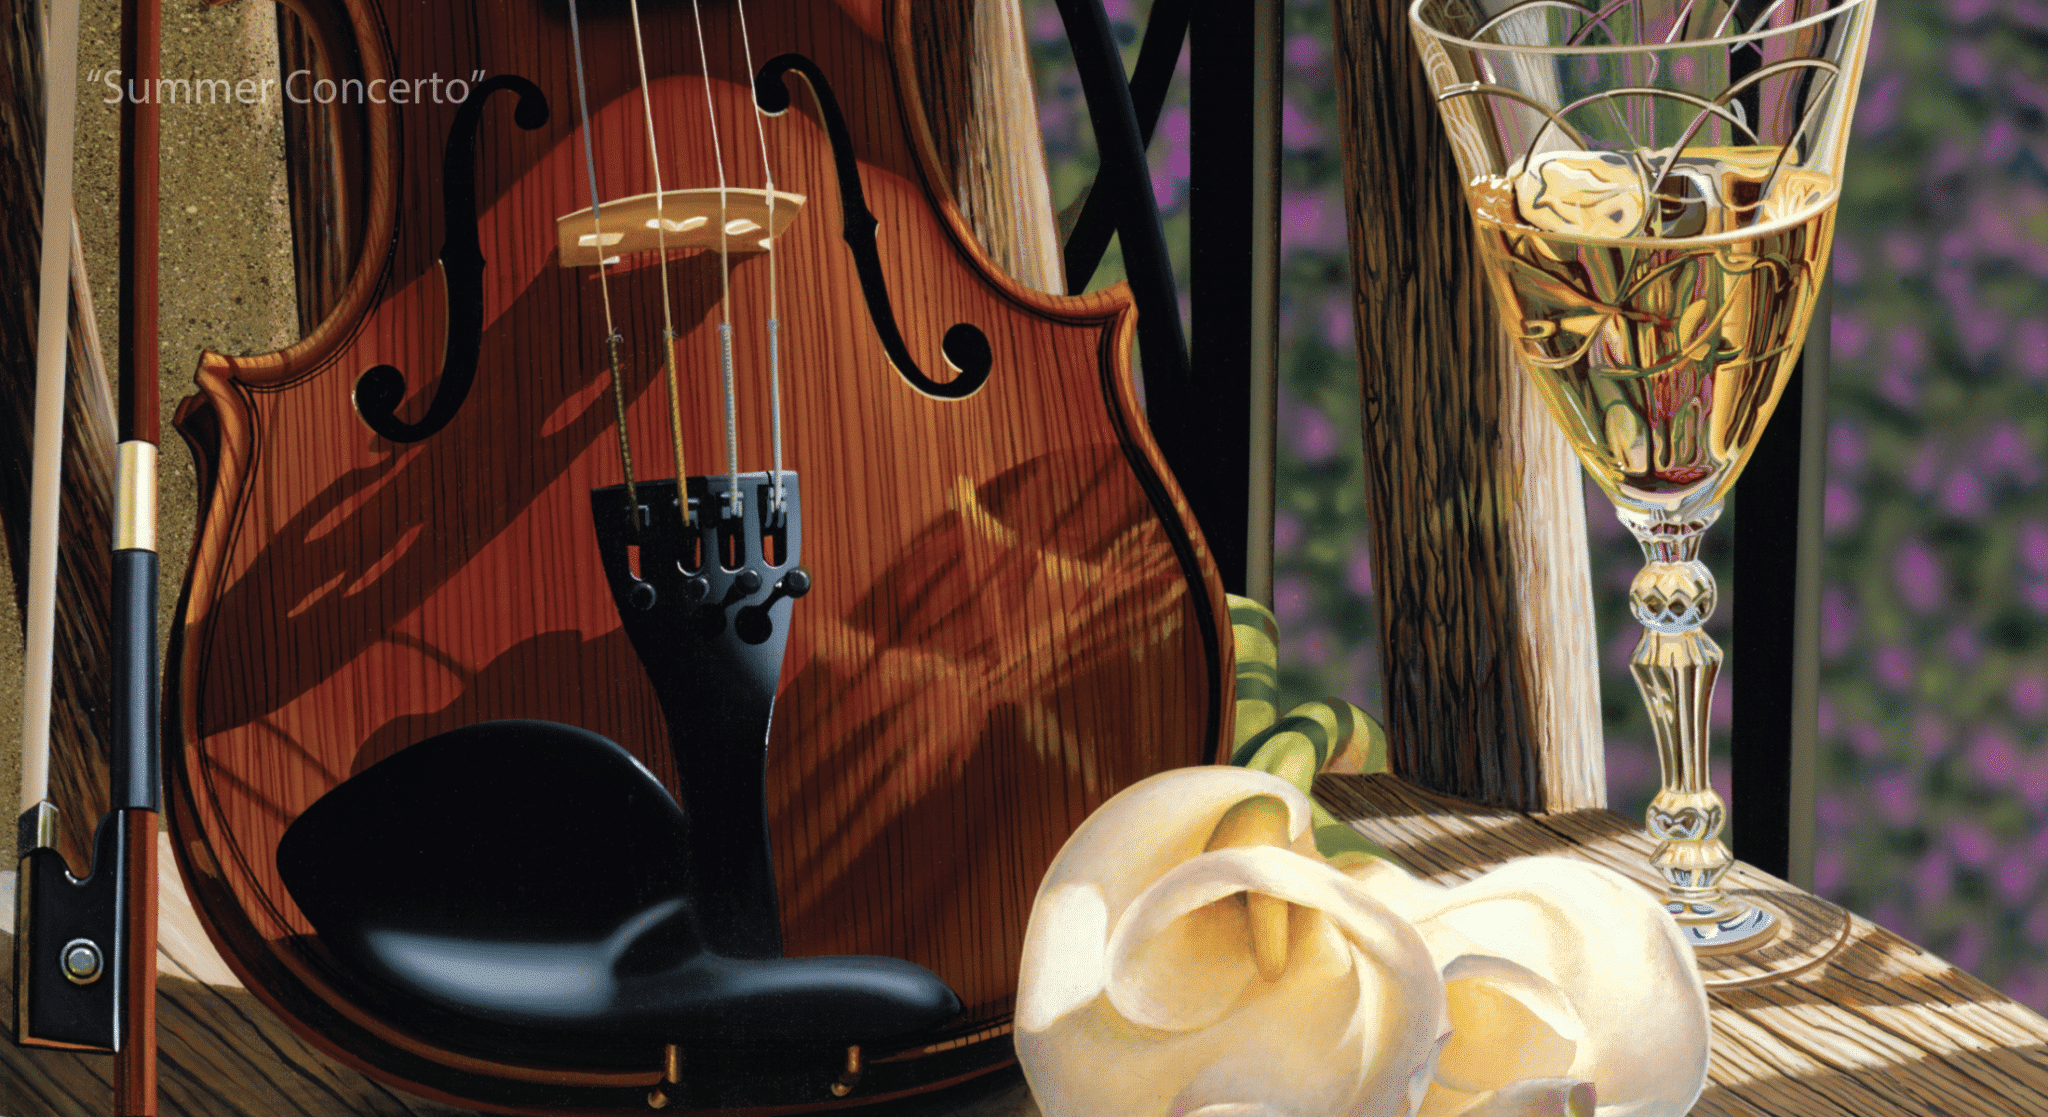 Scott Jacobs' violin and champagne painting "Summer Concerto"